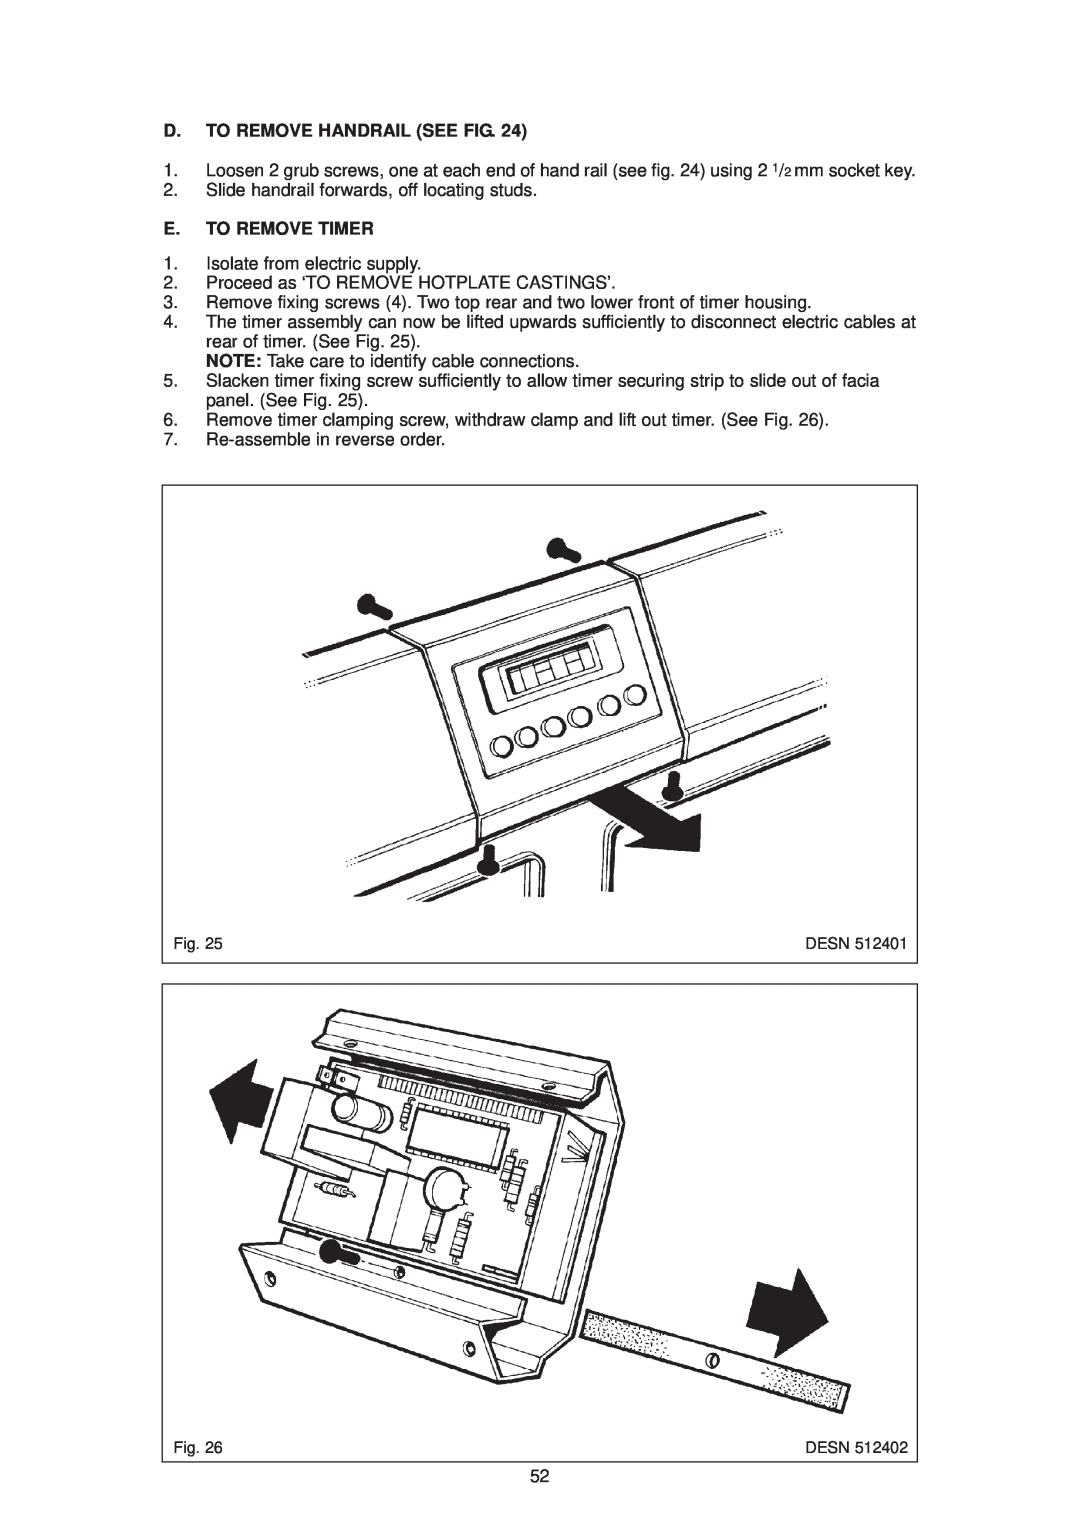 Aga Ranges DESN 512387 A owner manual D. To Remove Handrail See Fig, E. To Remove Timer 